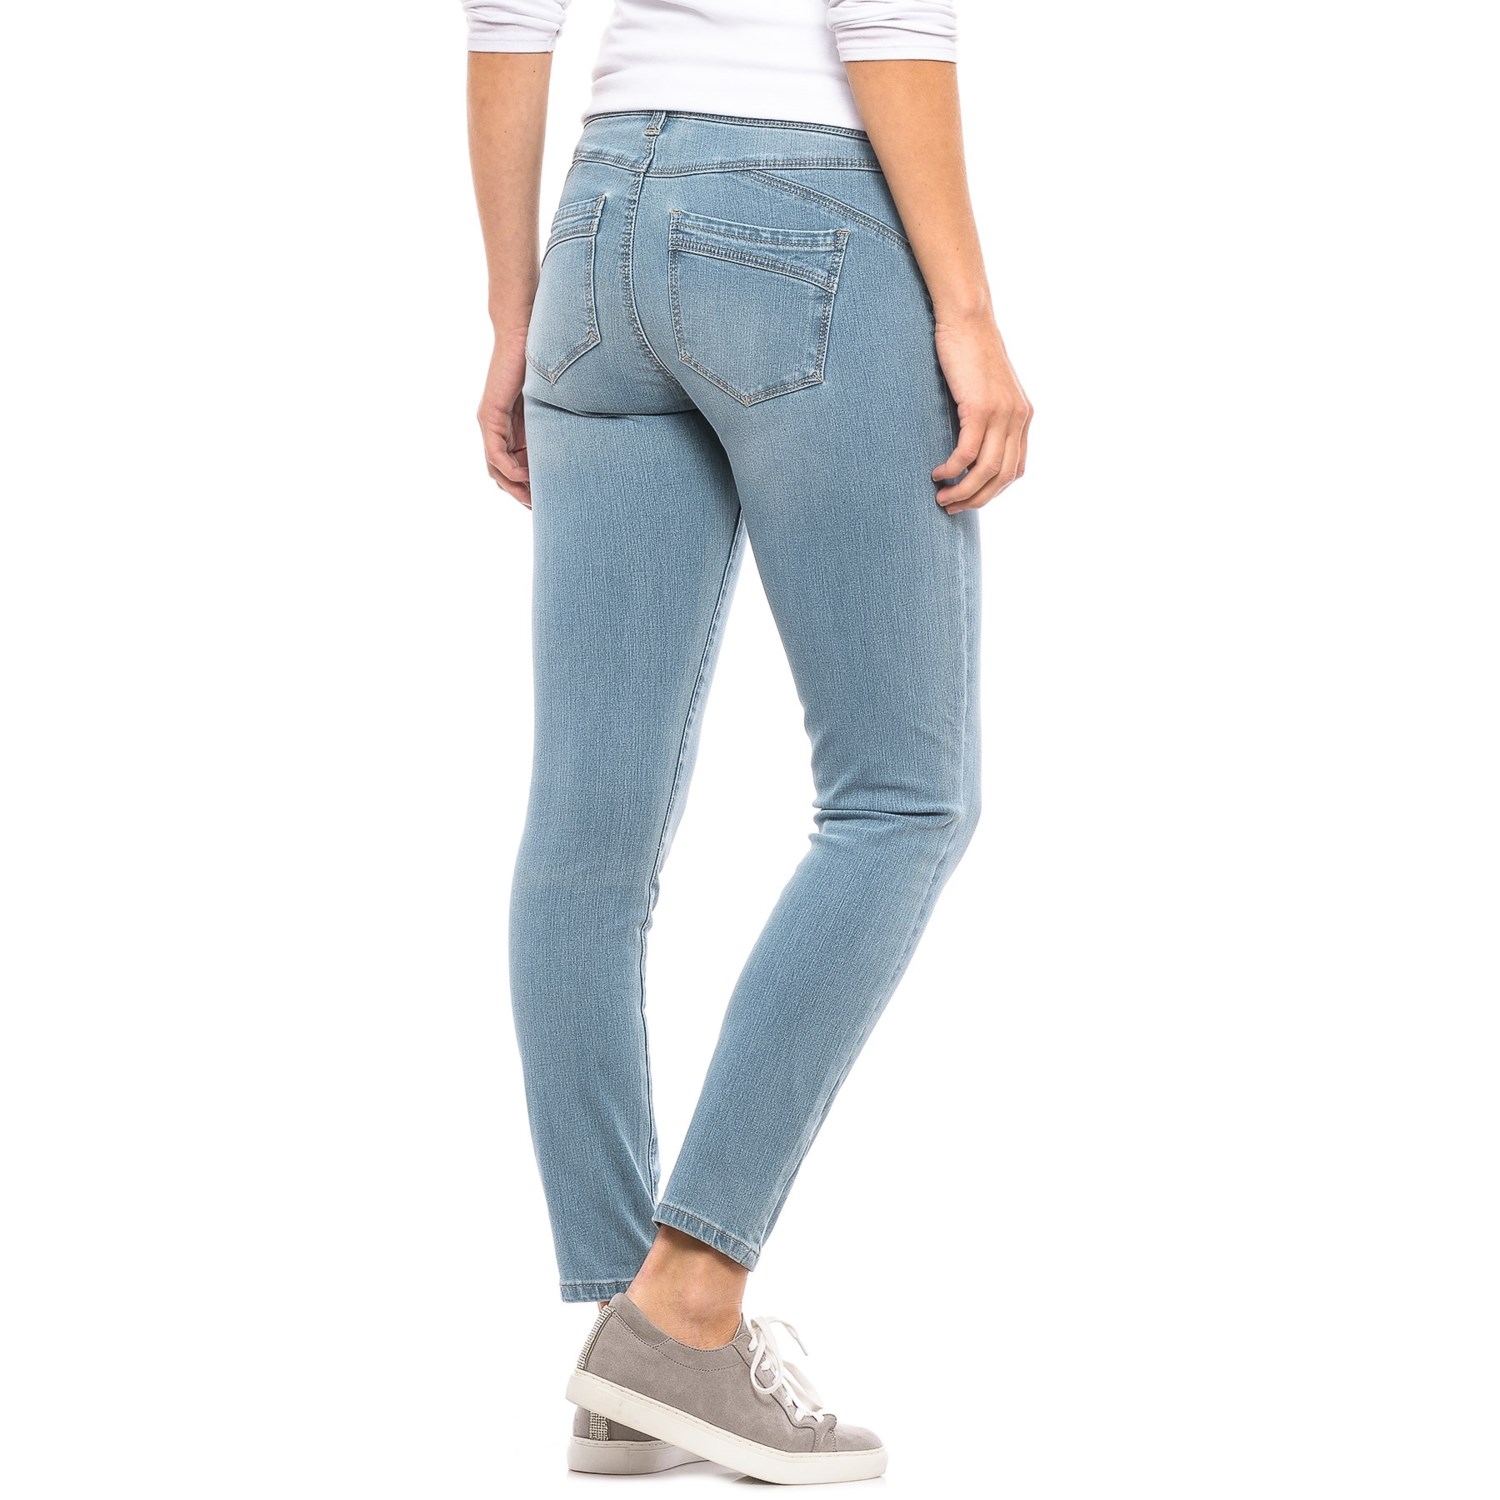 Liverpool Jeans Company Contour and Shaping Skinny Ankle Jeans (For Women)